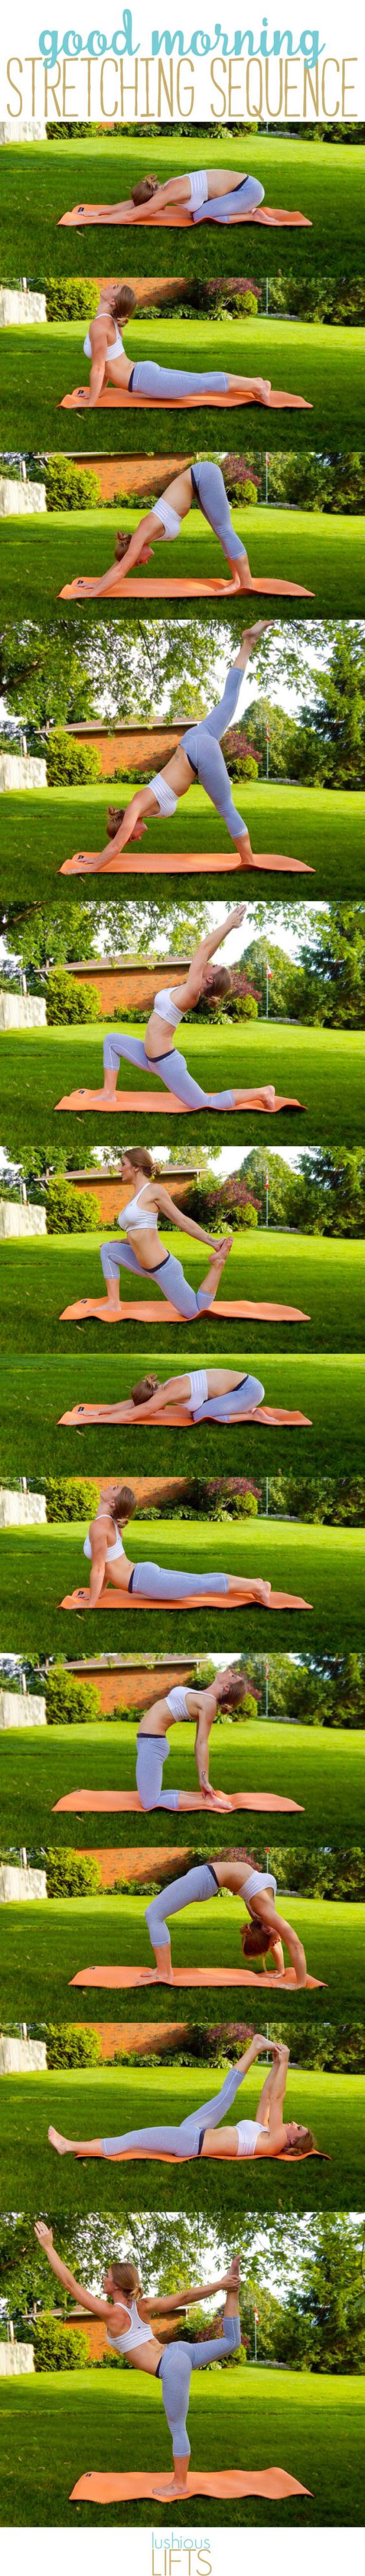 A few great stretches to help wake you up & energize you for the day